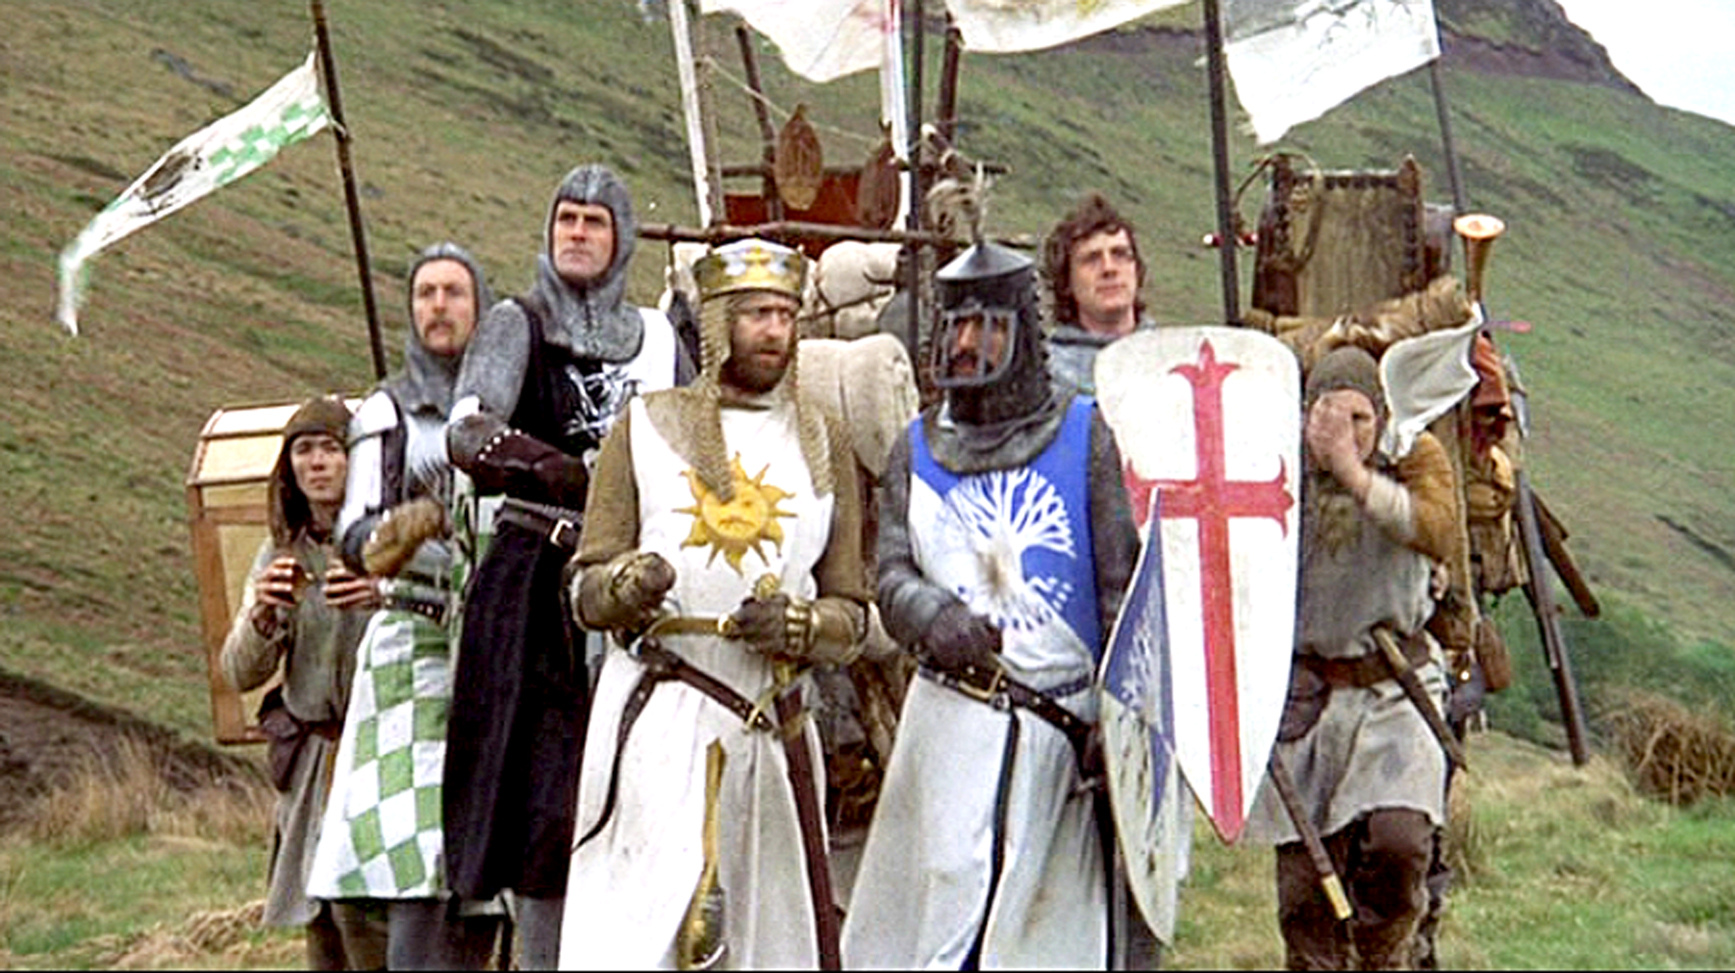 Monty python: the global phenomenon that continues to thrive